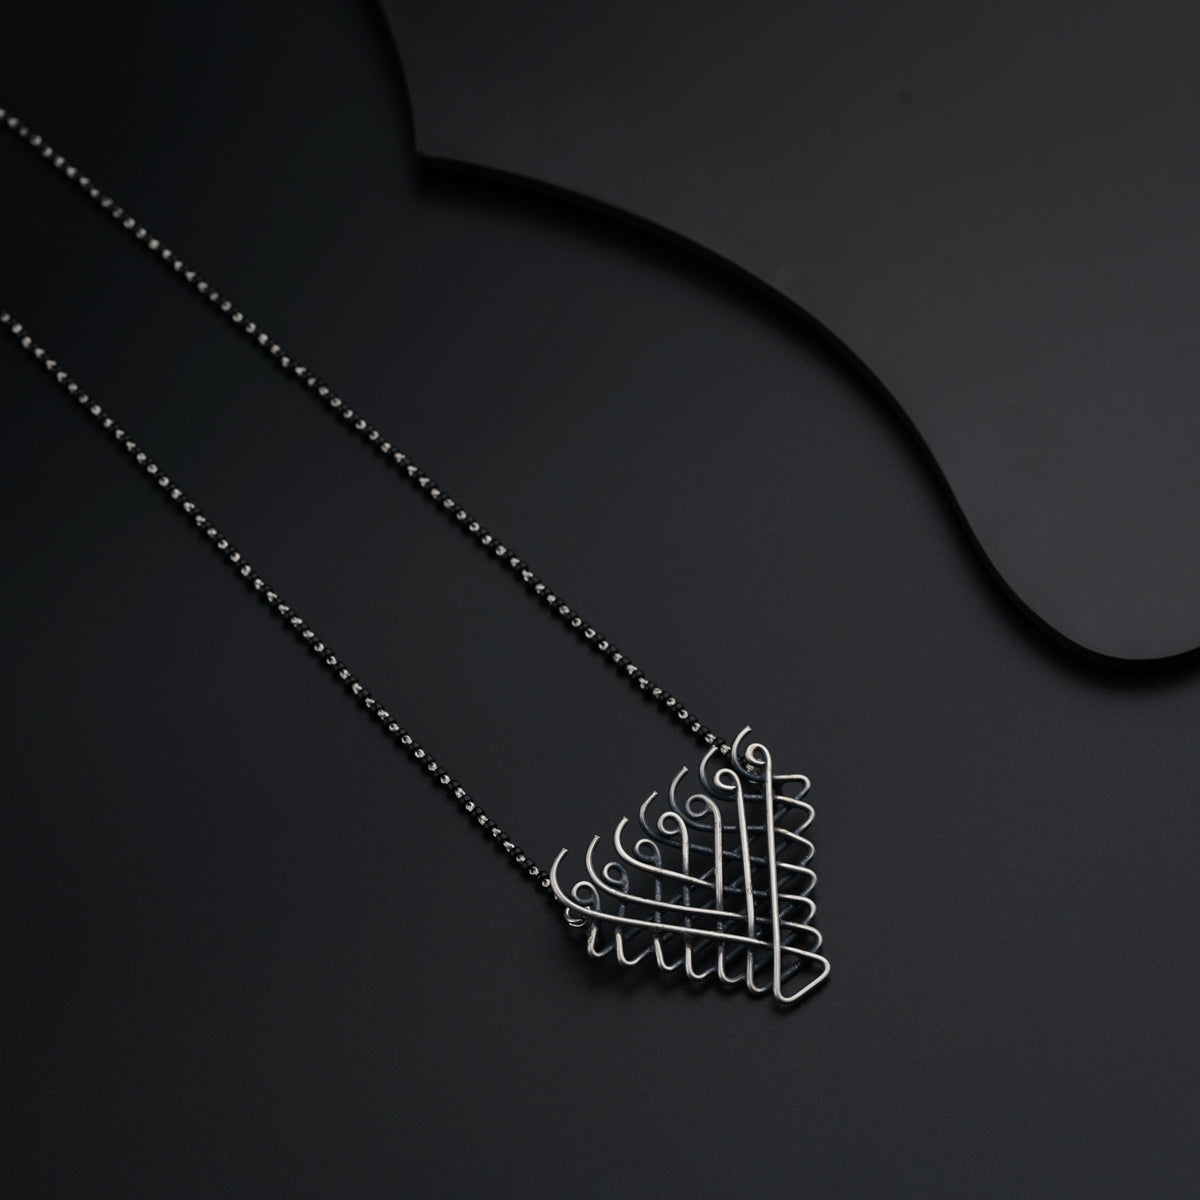 a necklace with a design on it on a black surface